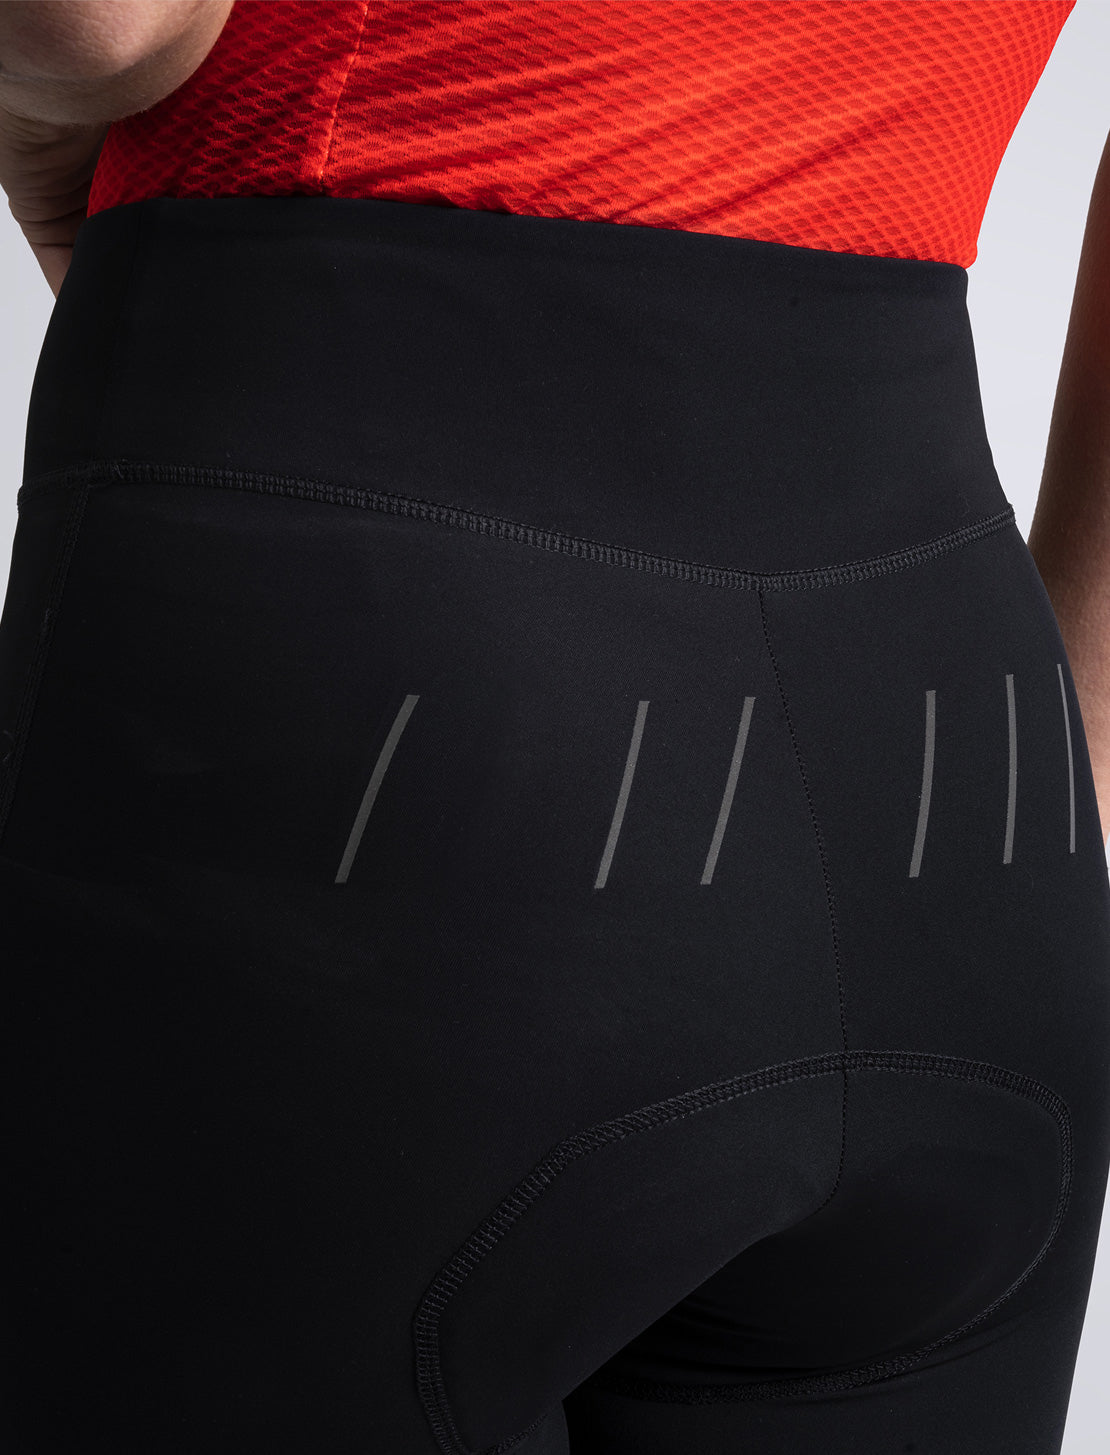 Women's 3/4 Road Tights - Carbon Black